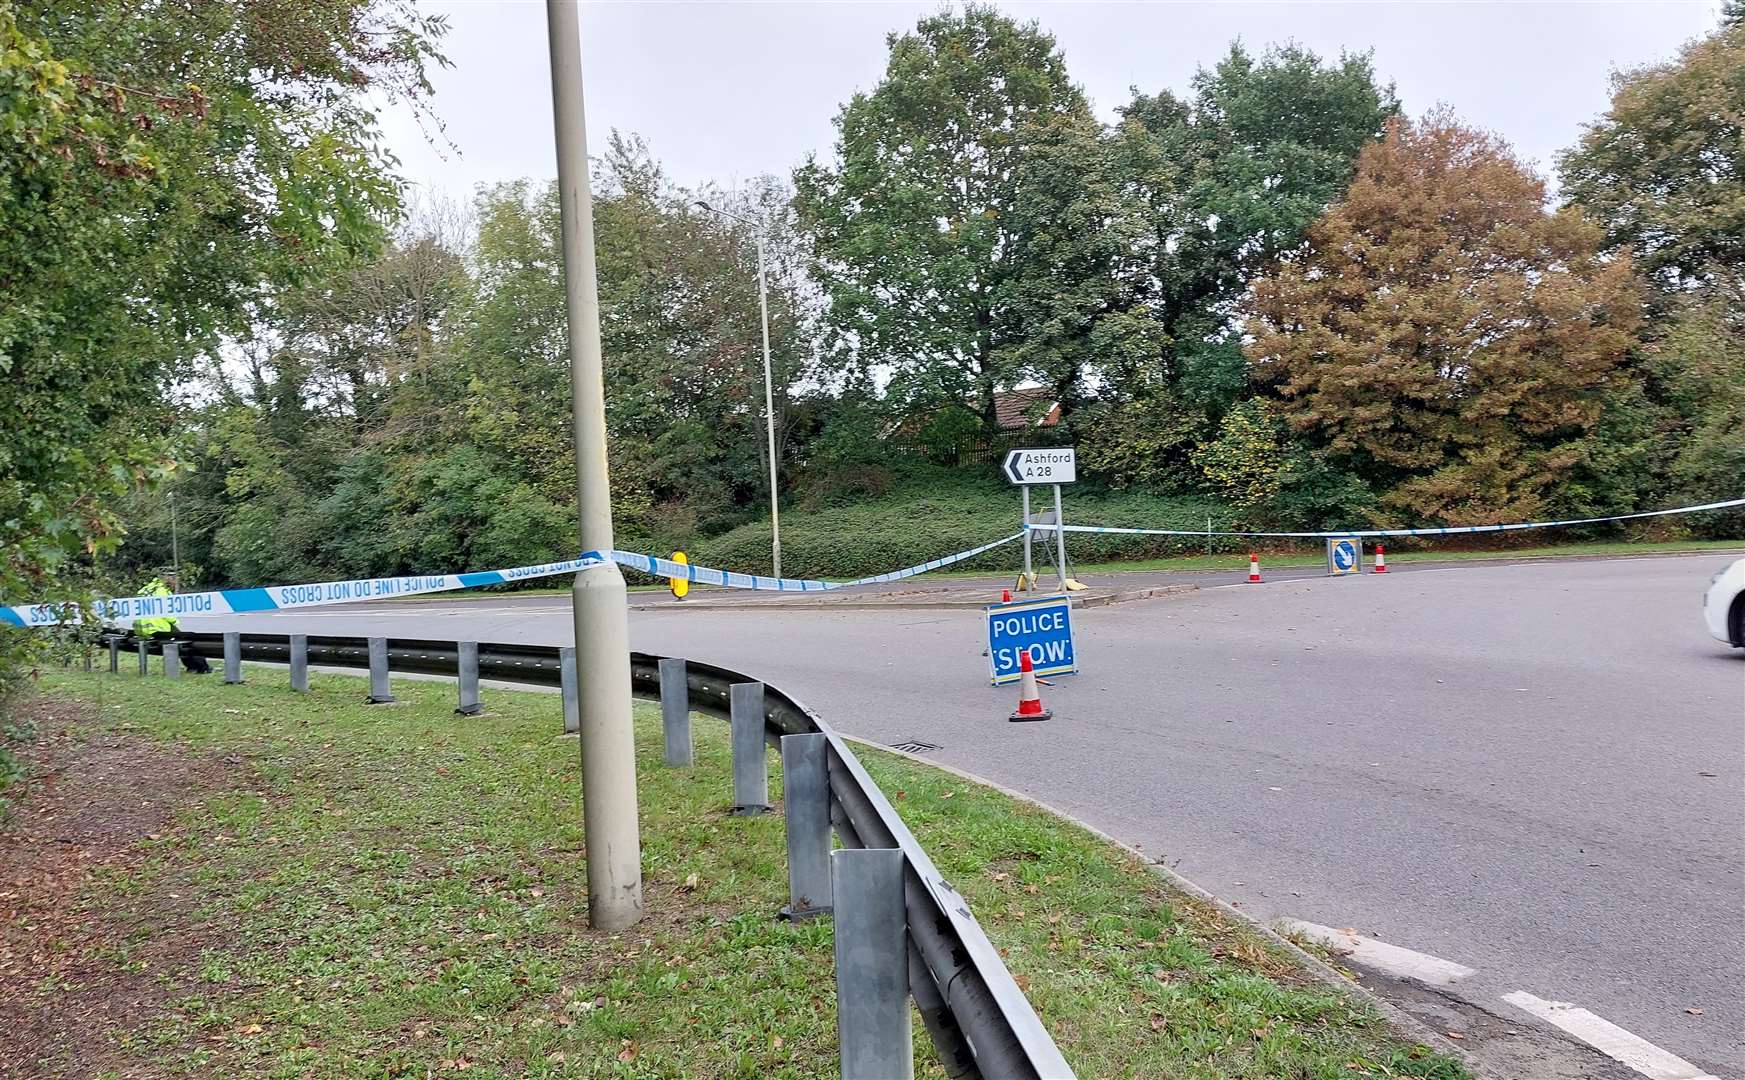 The A28 Great Chart Bypass was taped off between the Matalan and Tithe Barn Lane roundabouts